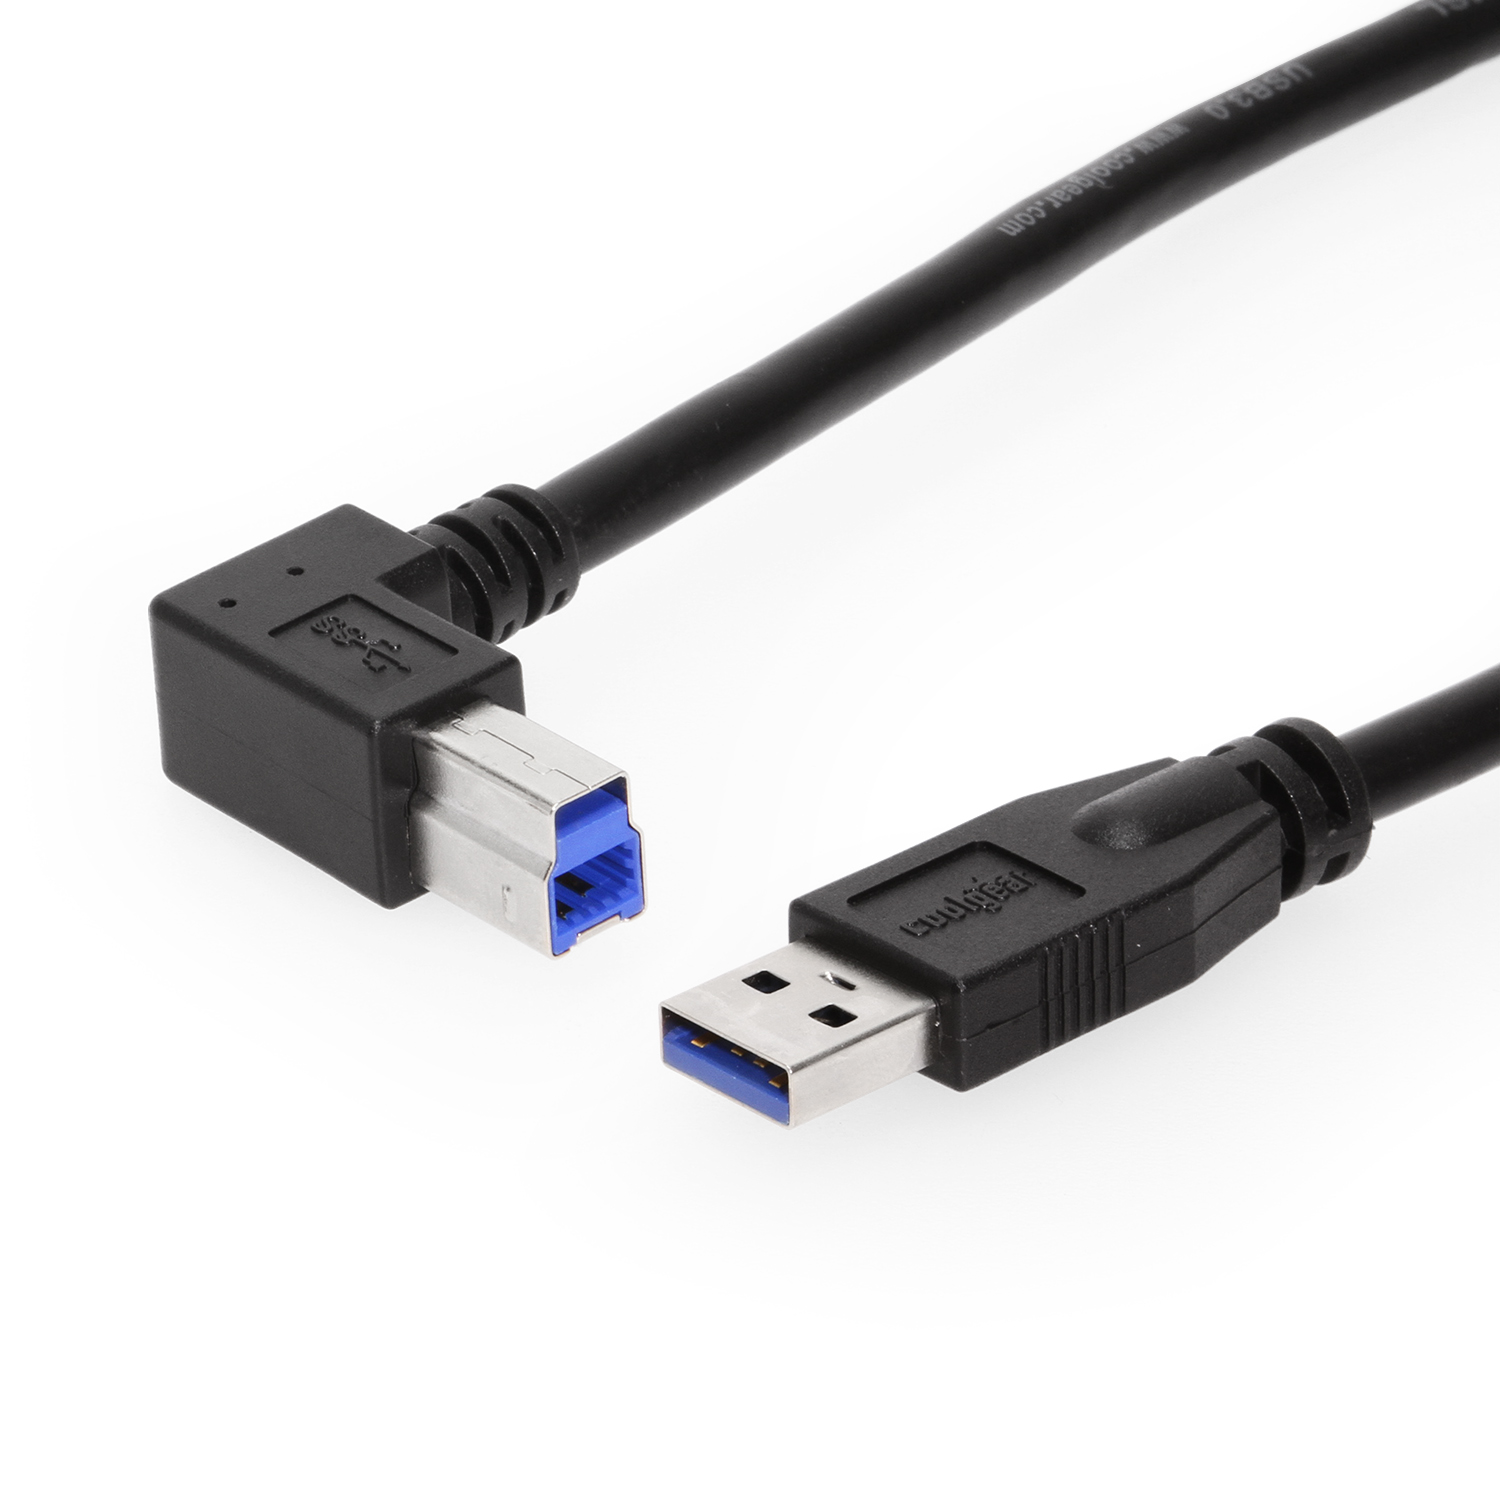 USB 3.0 Cables Archives - Coolgear